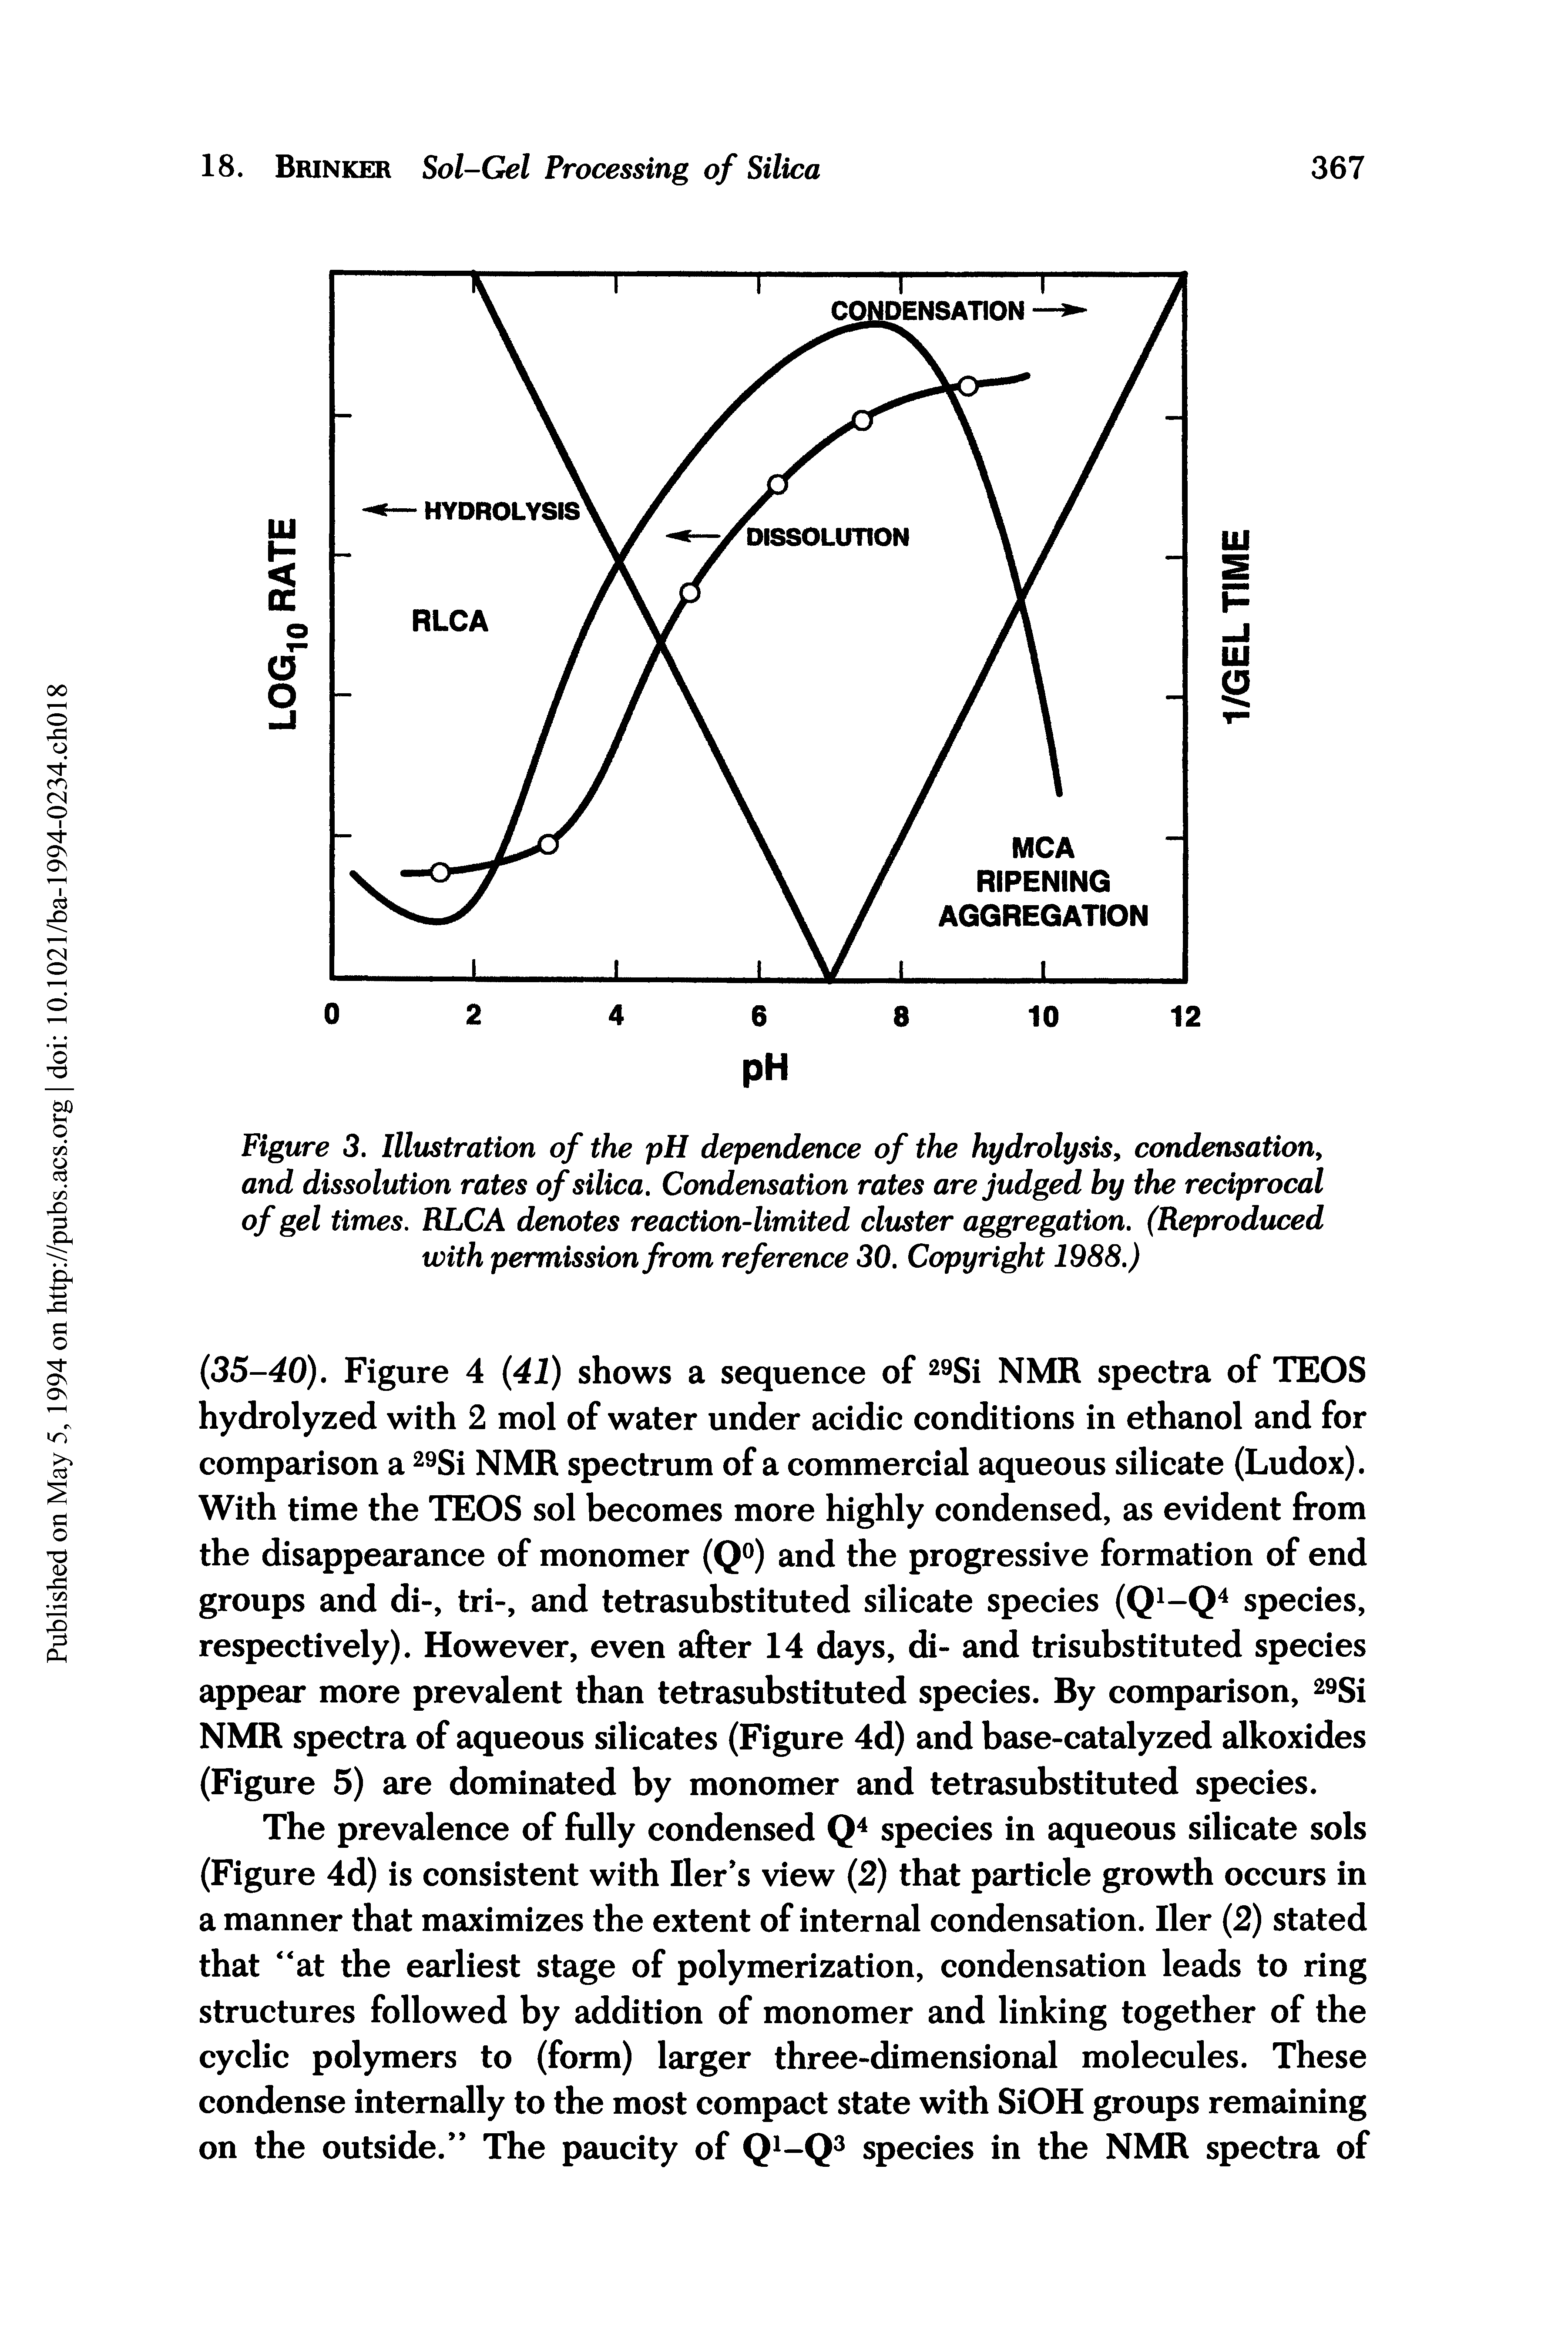 Figure 3. Illustration of the pH dependence of the hydrolysis, condensation, and dissolution rates of silica. Condensation rates are judged by the reciprocal of gel times. RLCA denotes reaction-limited cluster aggregation. (Reproduced with permission from reference 30. Copyright 1988.)...